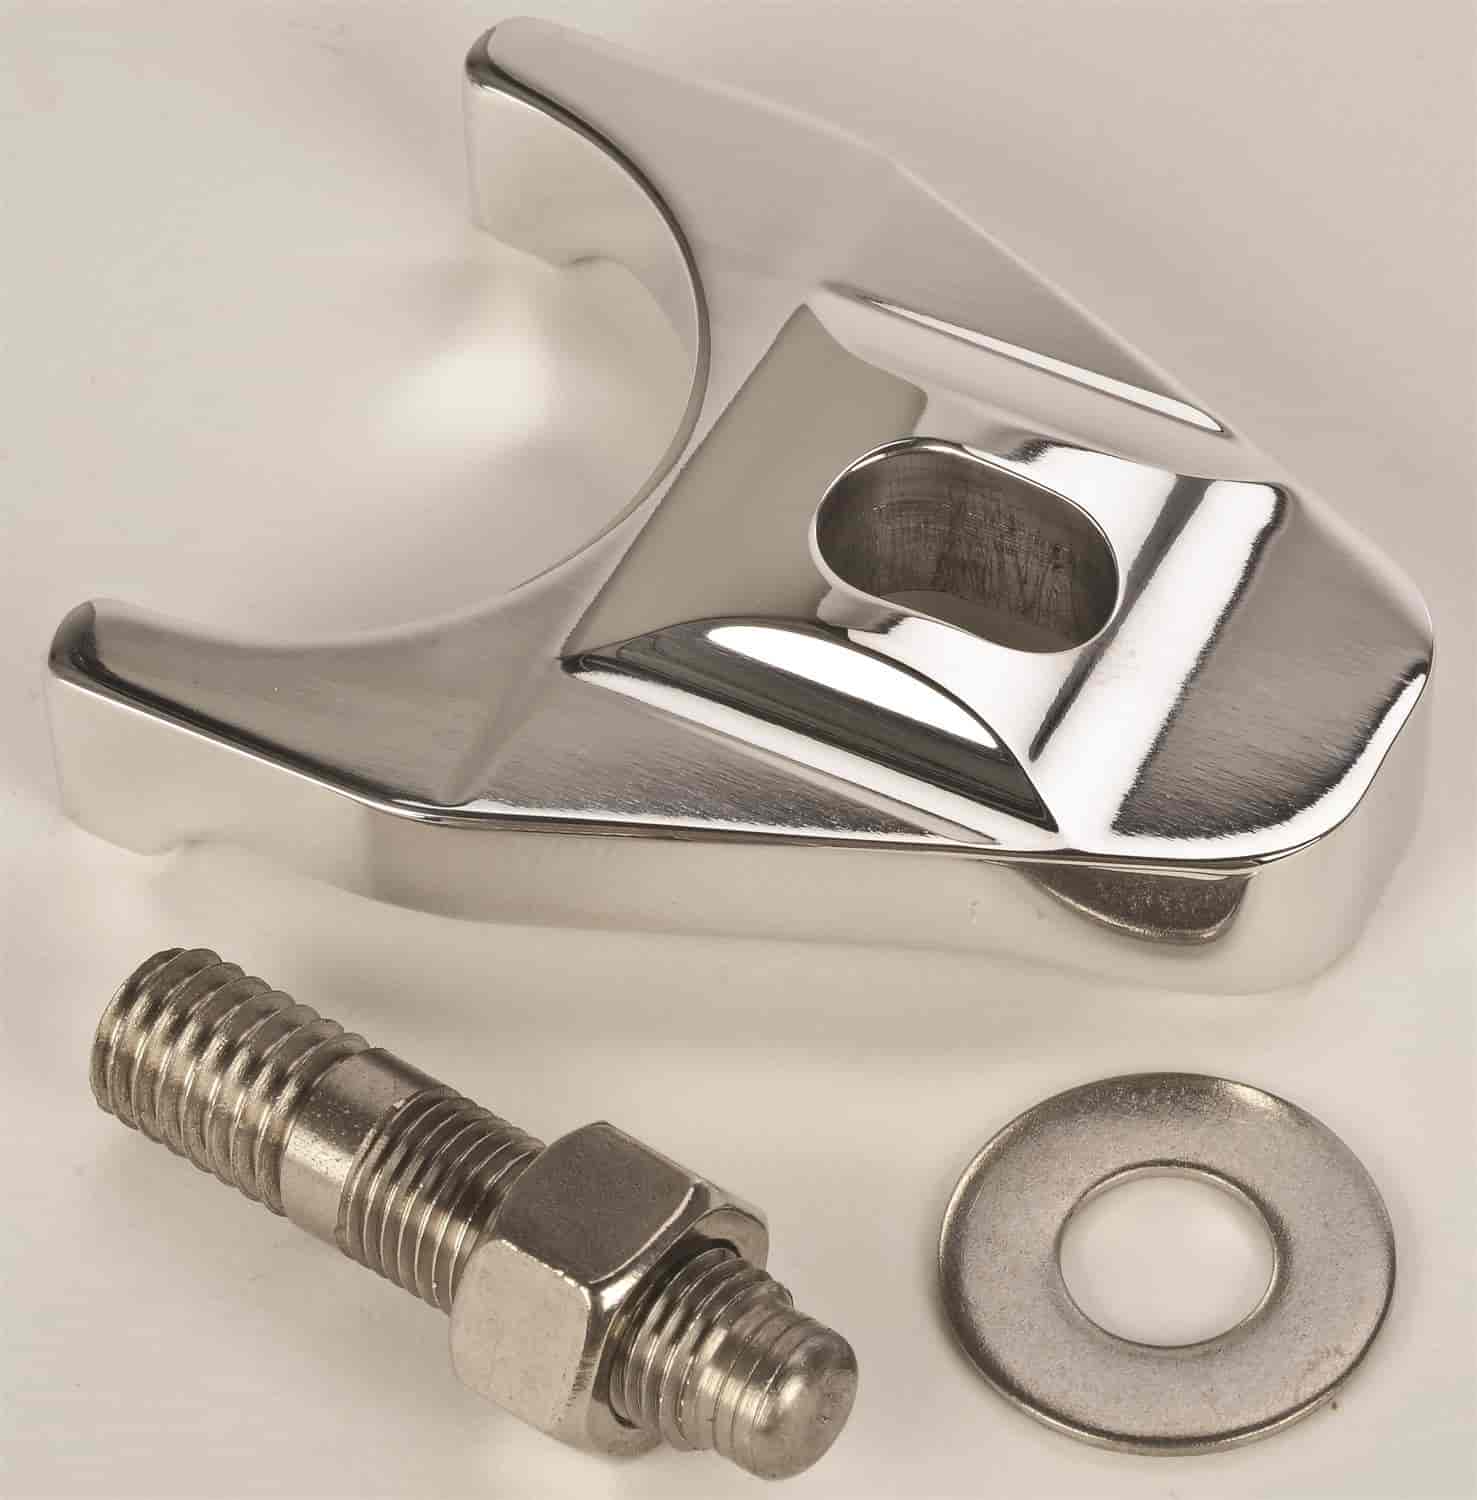 Billet Distributor Hold-Down Clamp Chevy: 90° V6, Small Block, and Big Block [Polished]